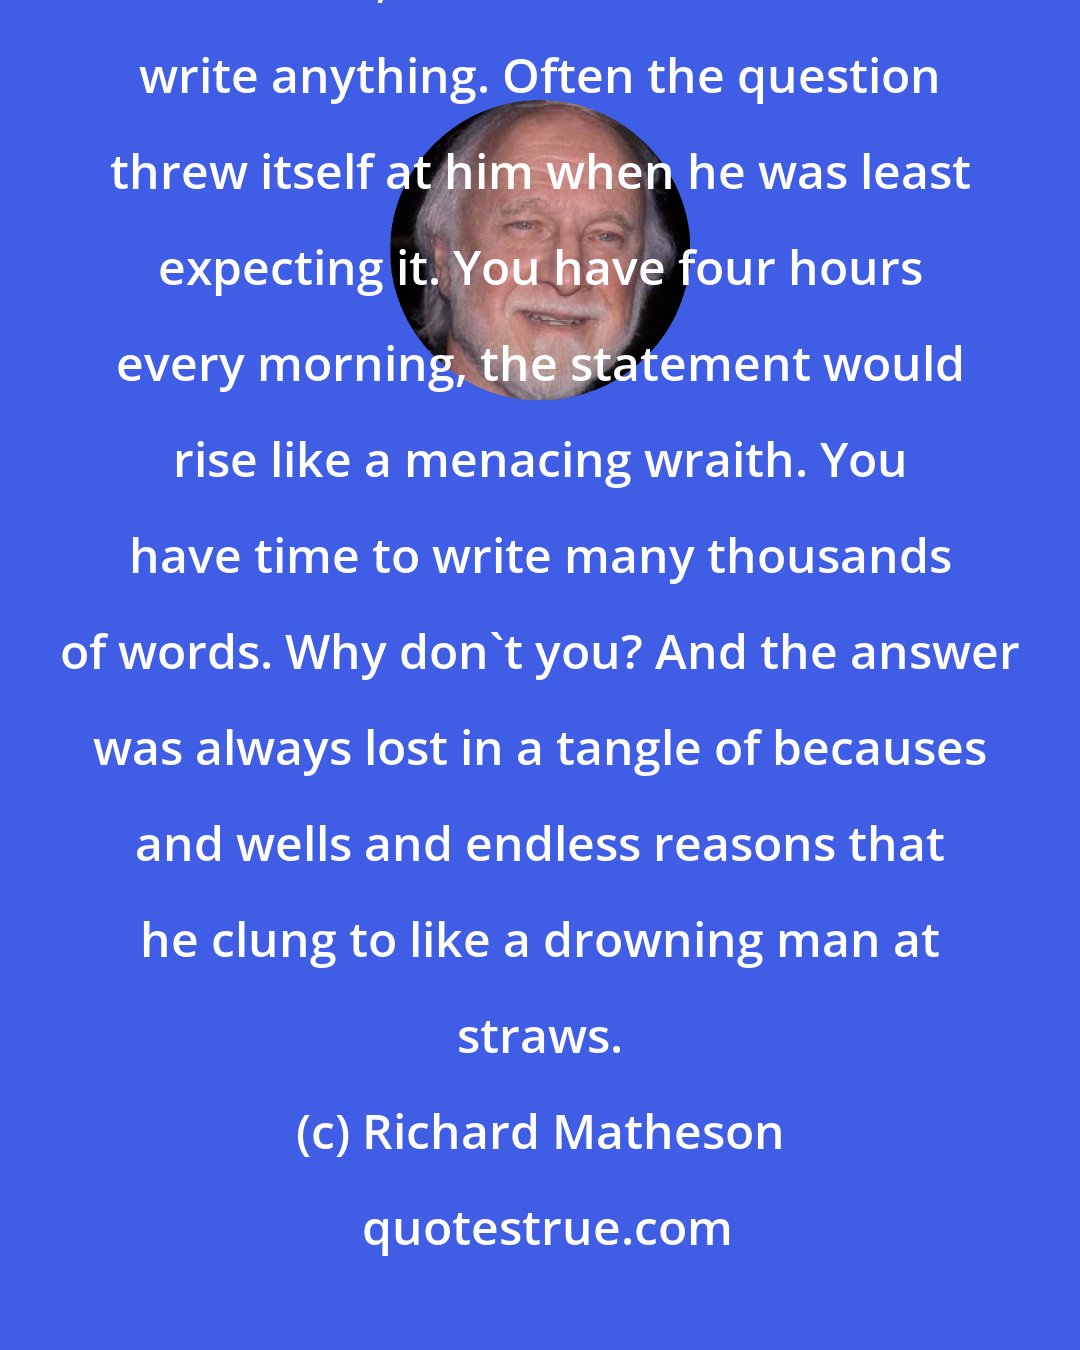 Richard Matheson: He pretended it was the only thing that kept him from it. But, far back in his mind, he wondered if he could write anything. Often the question threw itself at him when he was least expecting it. You have four hours every morning, the statement would rise like a menacing wraith. You have time to write many thousands of words. Why don't you? And the answer was always lost in a tangle of becauses and wells and endless reasons that he clung to like a drowning man at straws.